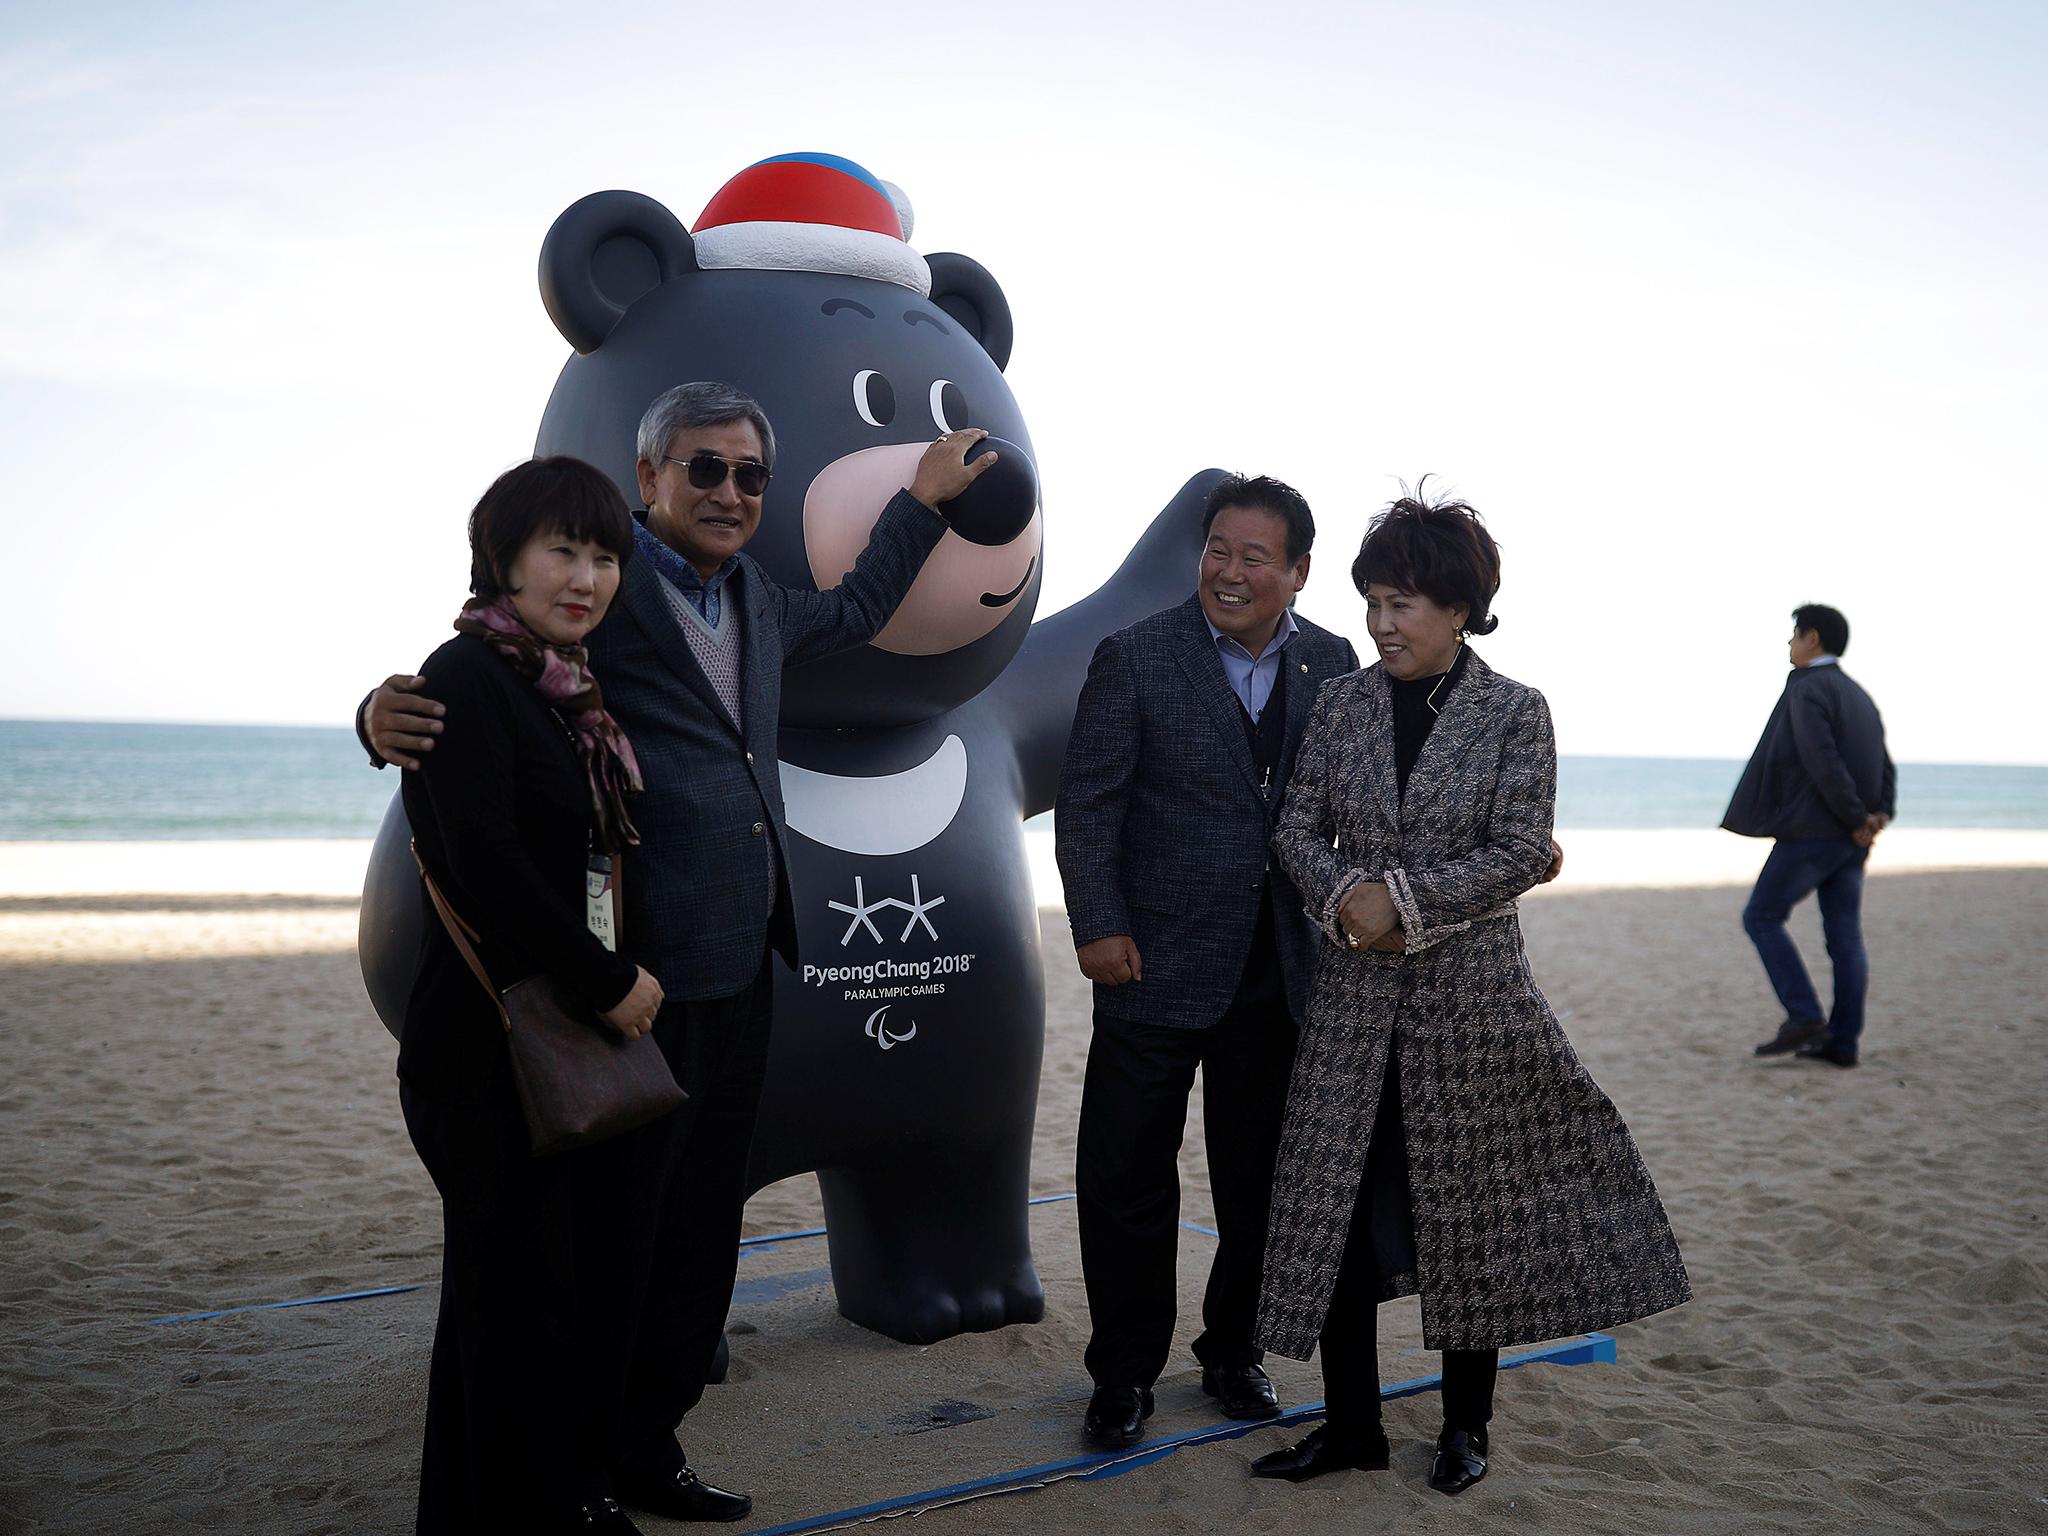 People pose with 2018 PyeongChang Winter Paralympics mascot Bandabi at the beach in the east coast city of Gangneung (Reuters)